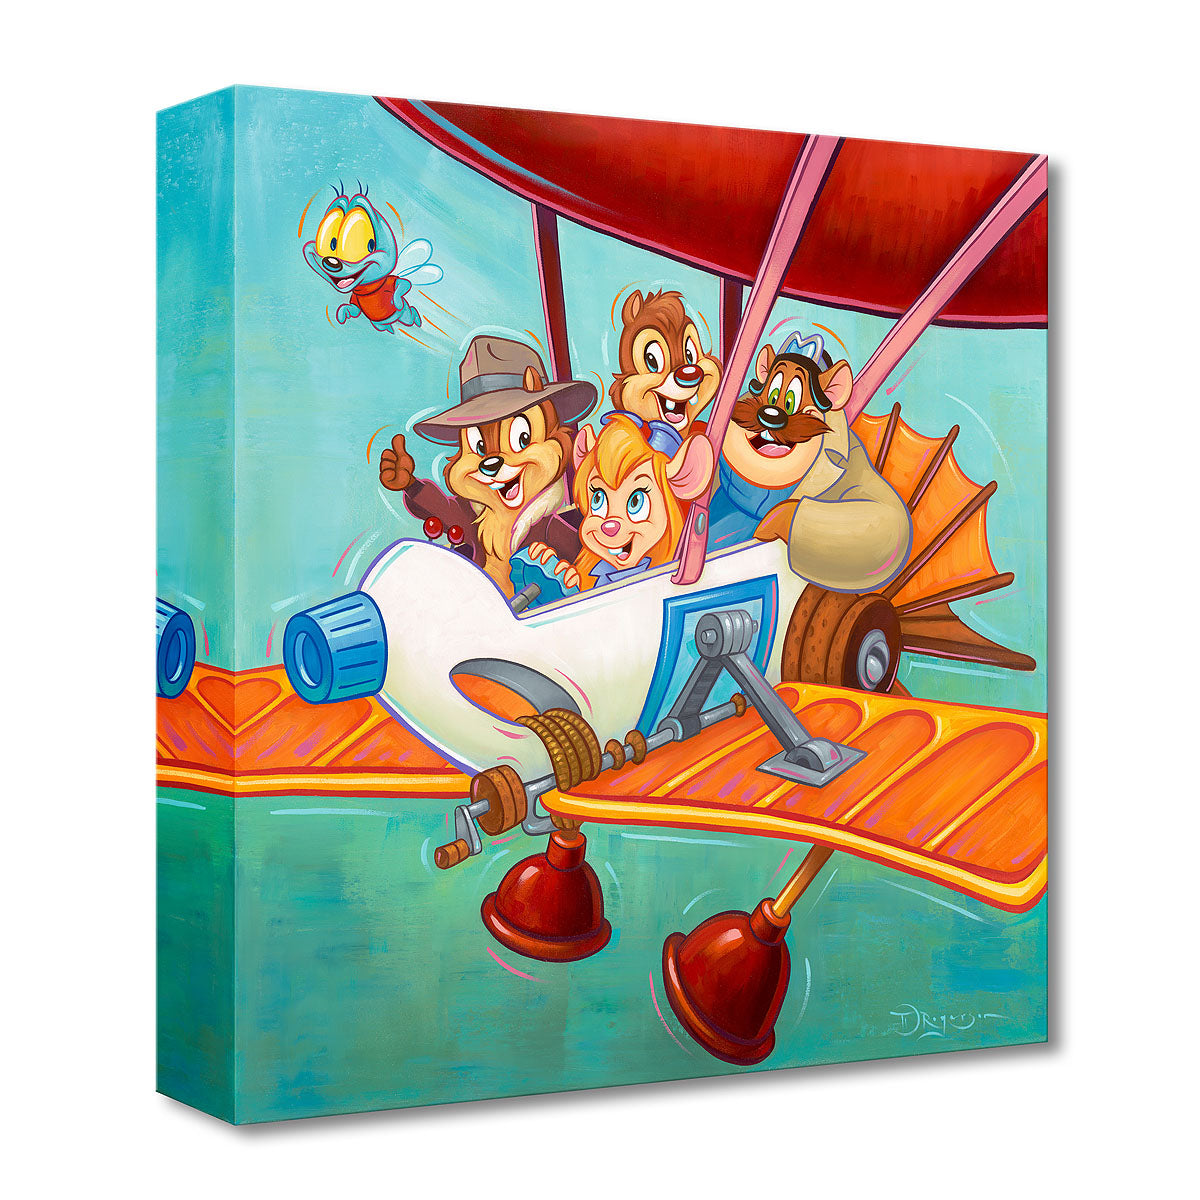 The Ranger Plane by Tim Rogerson  Chipmunks Chip and Dale are out on a joyous plane ride with friends.